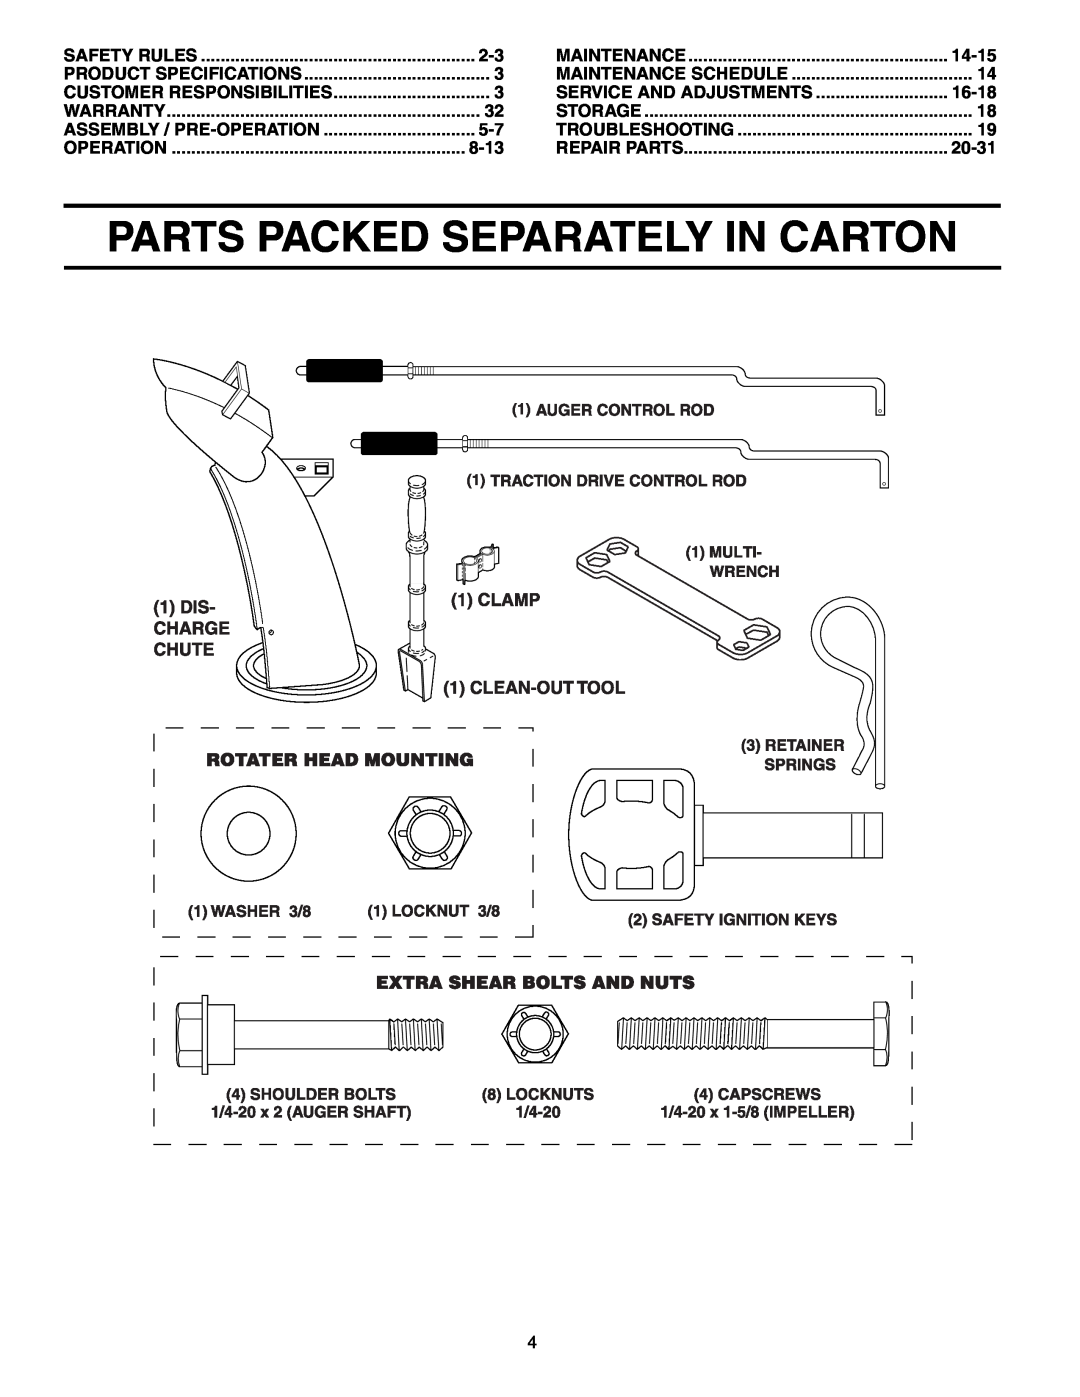 Poulan PP5524ESC owner manual Parts Packed Separately In Carton, 8-13, 14-15, Service And Adjustments, 16-18, 20-31 